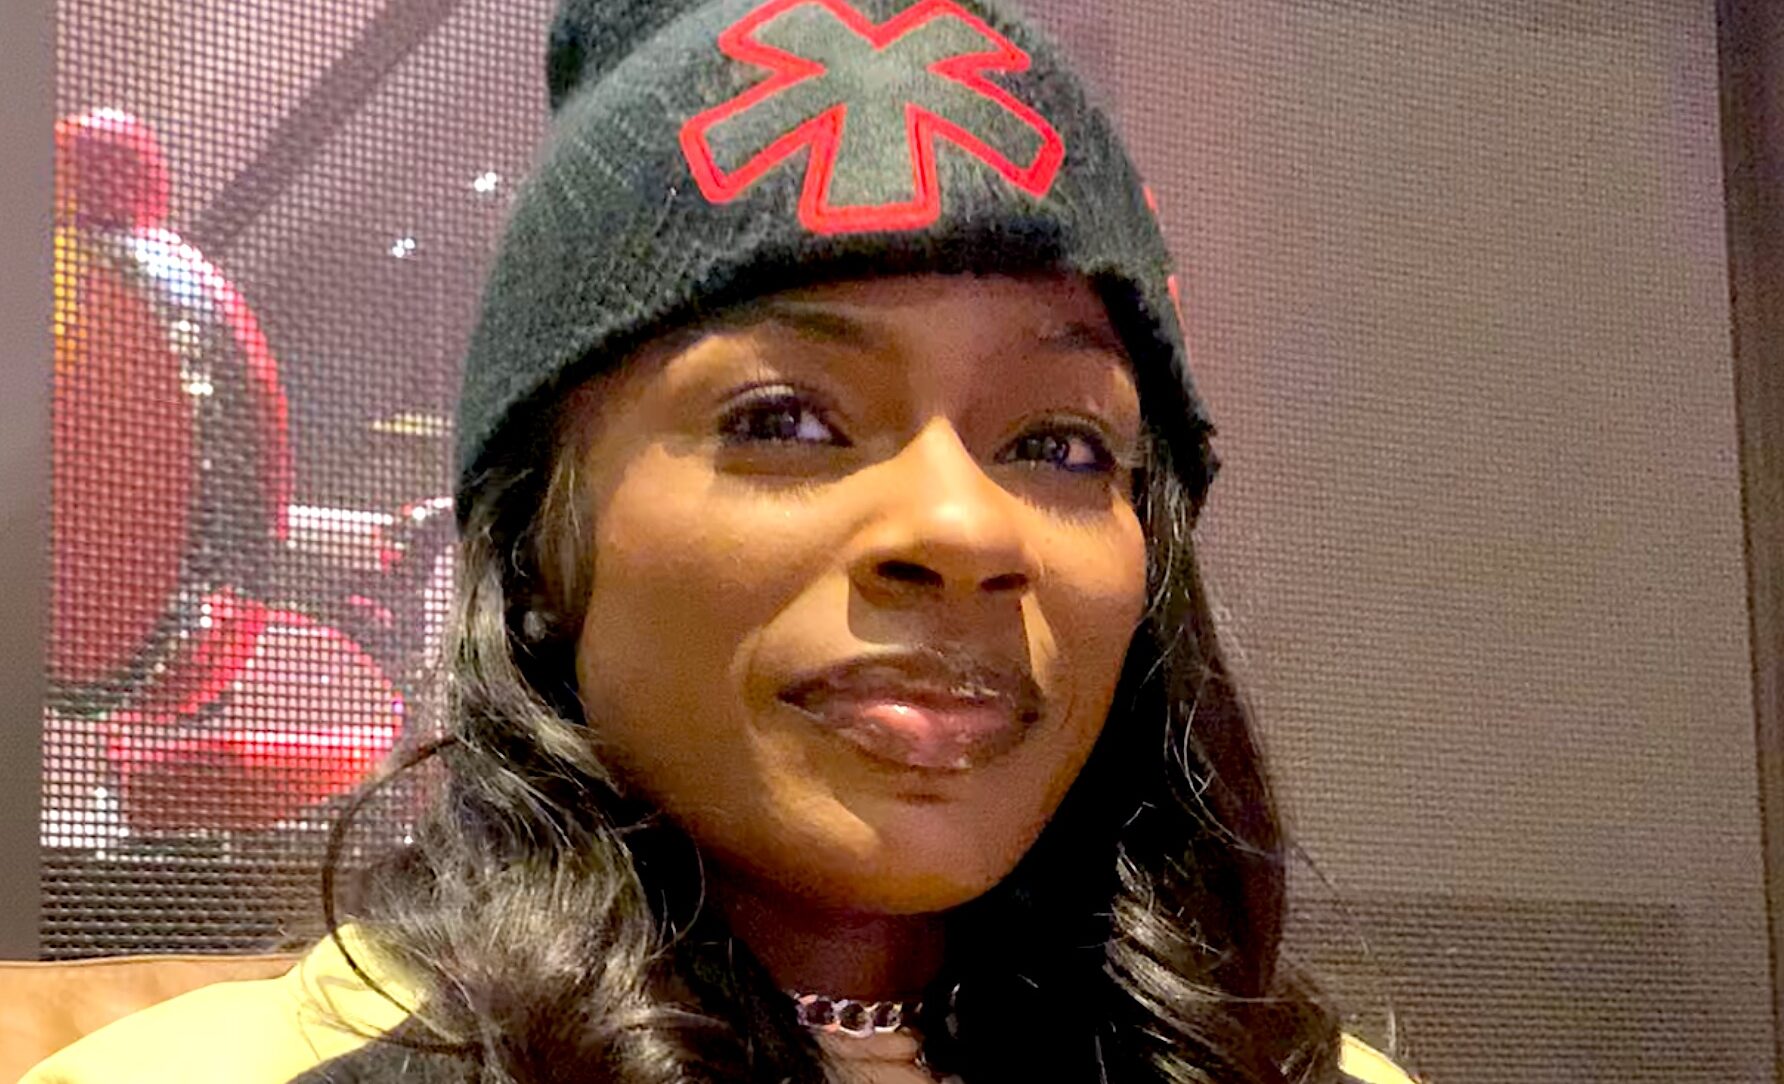 Atlanta Rapper Omeretta And Family Offers $10K Reward In Shooting Death Of 25-Year-Old Woman